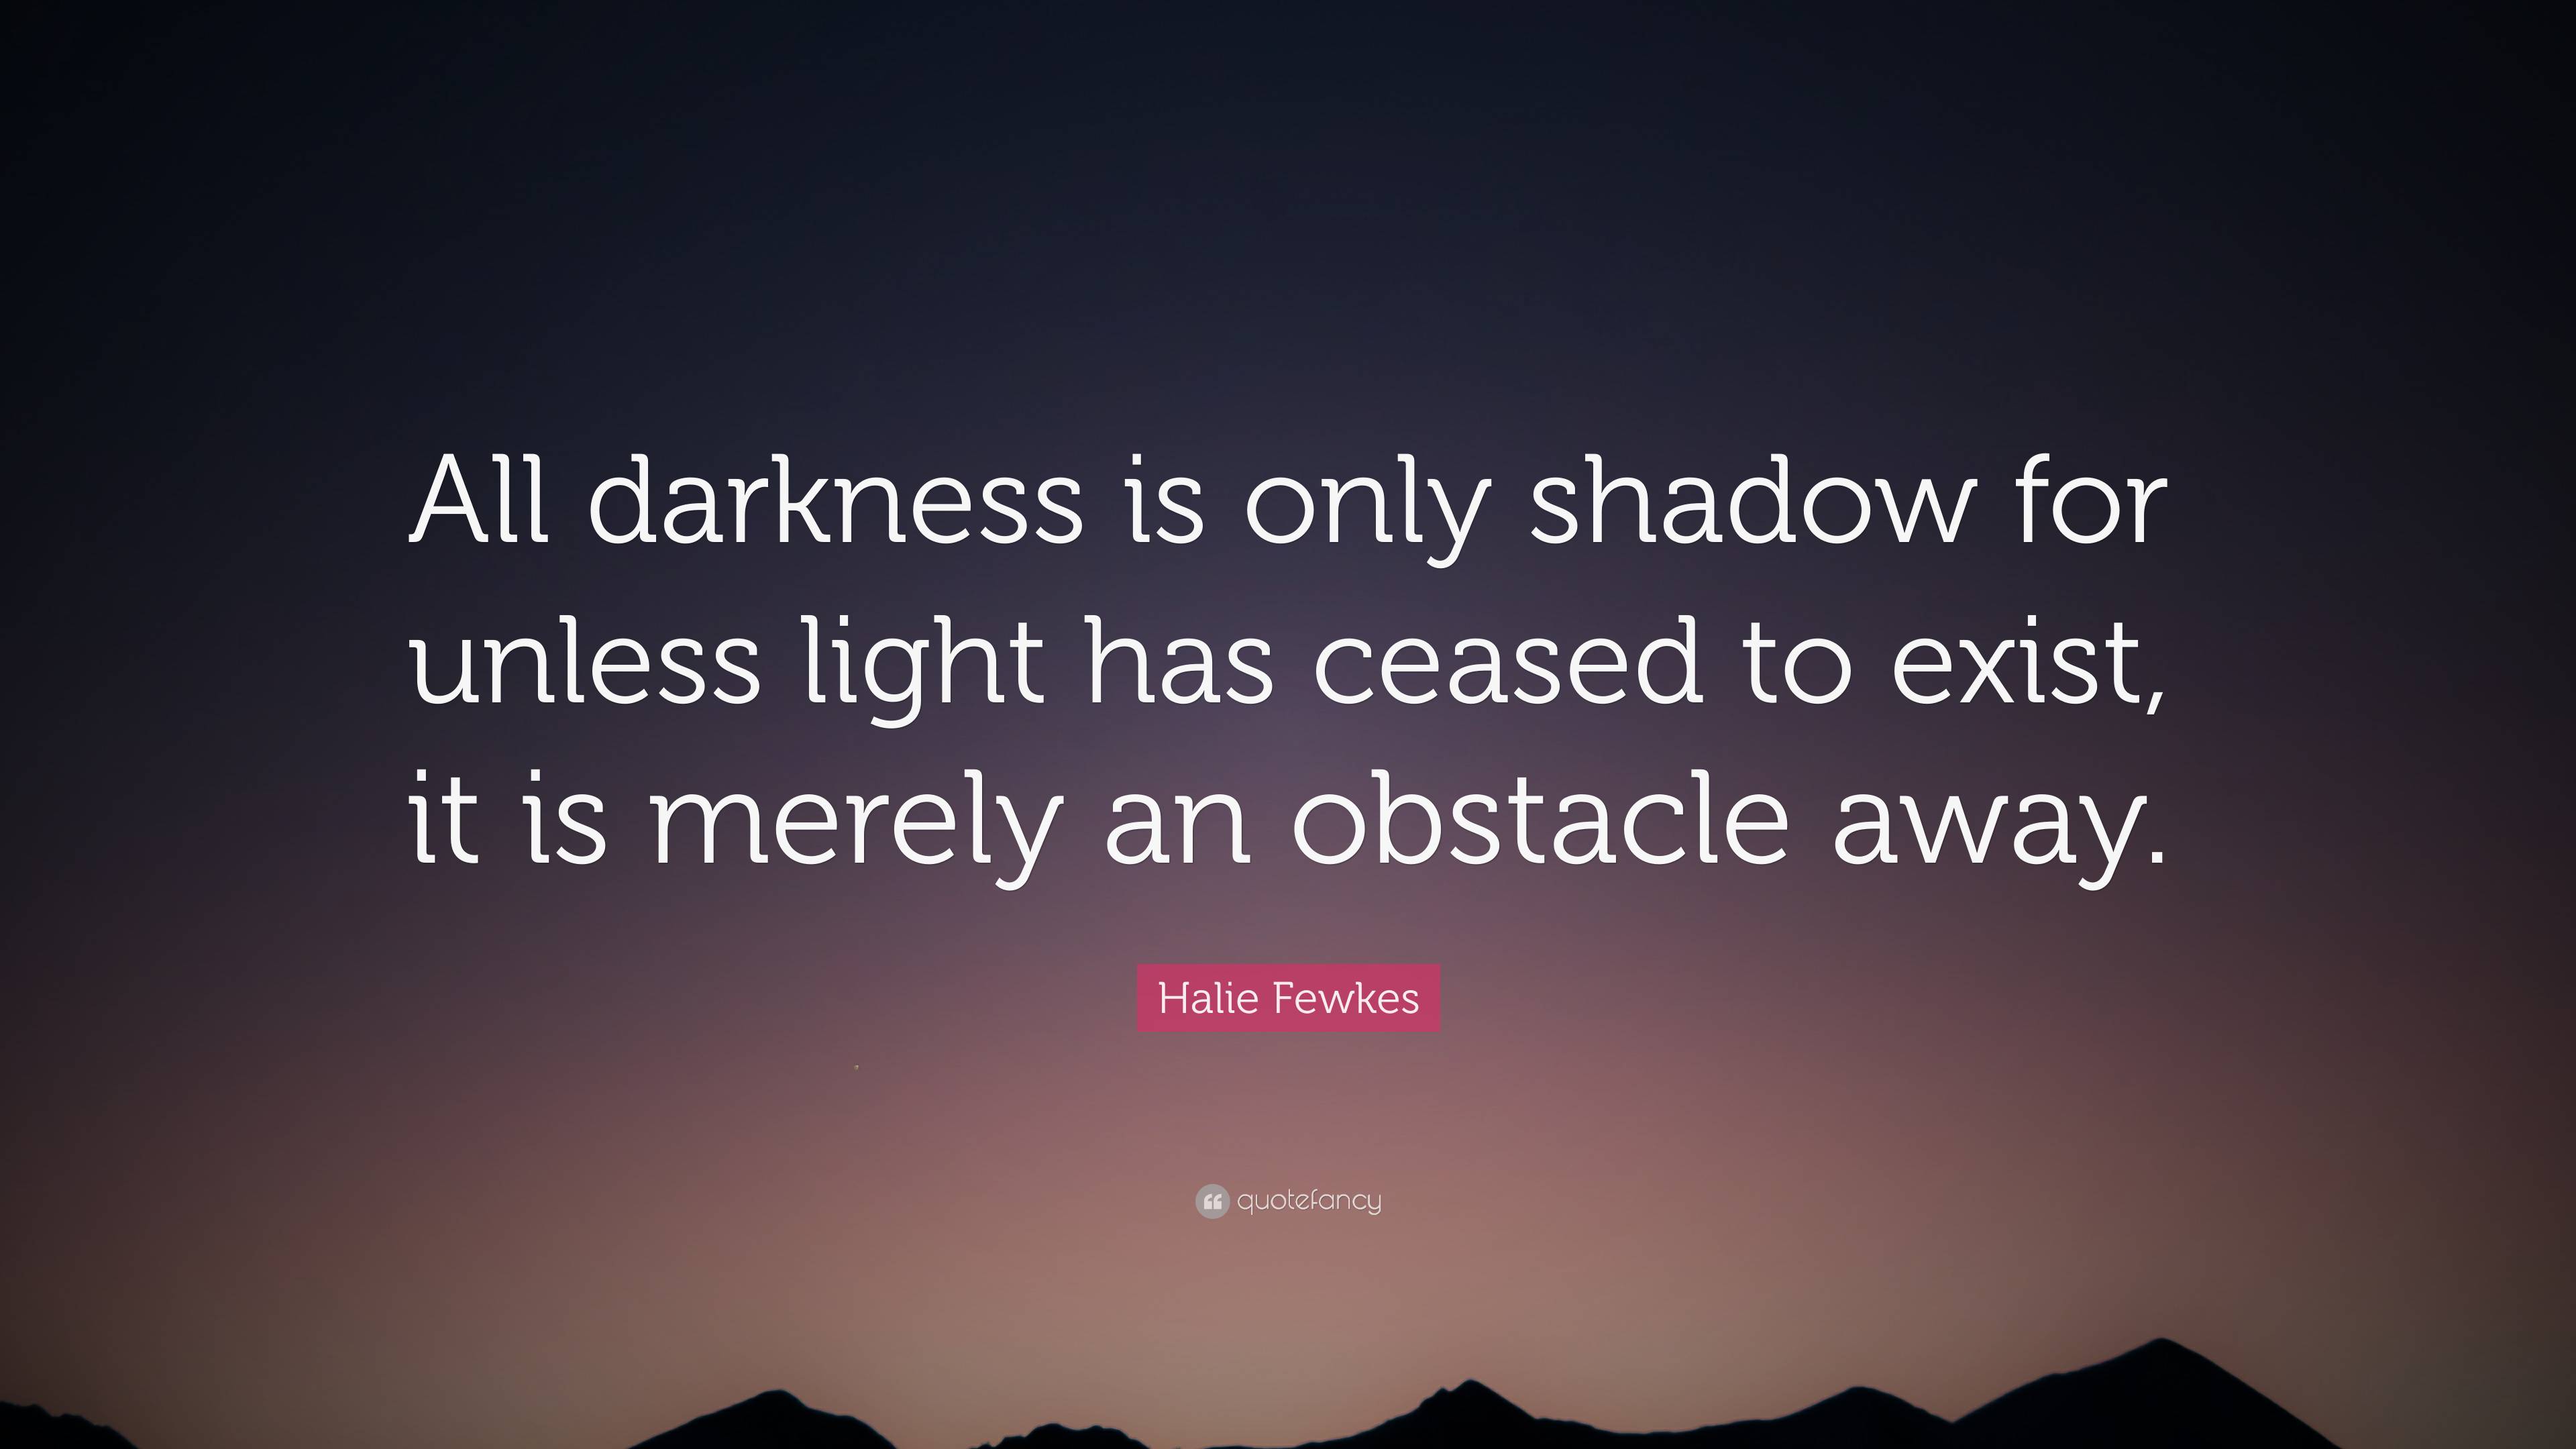 Halie Fewkes Quote: “All darkness is only shadow for unless light has ...